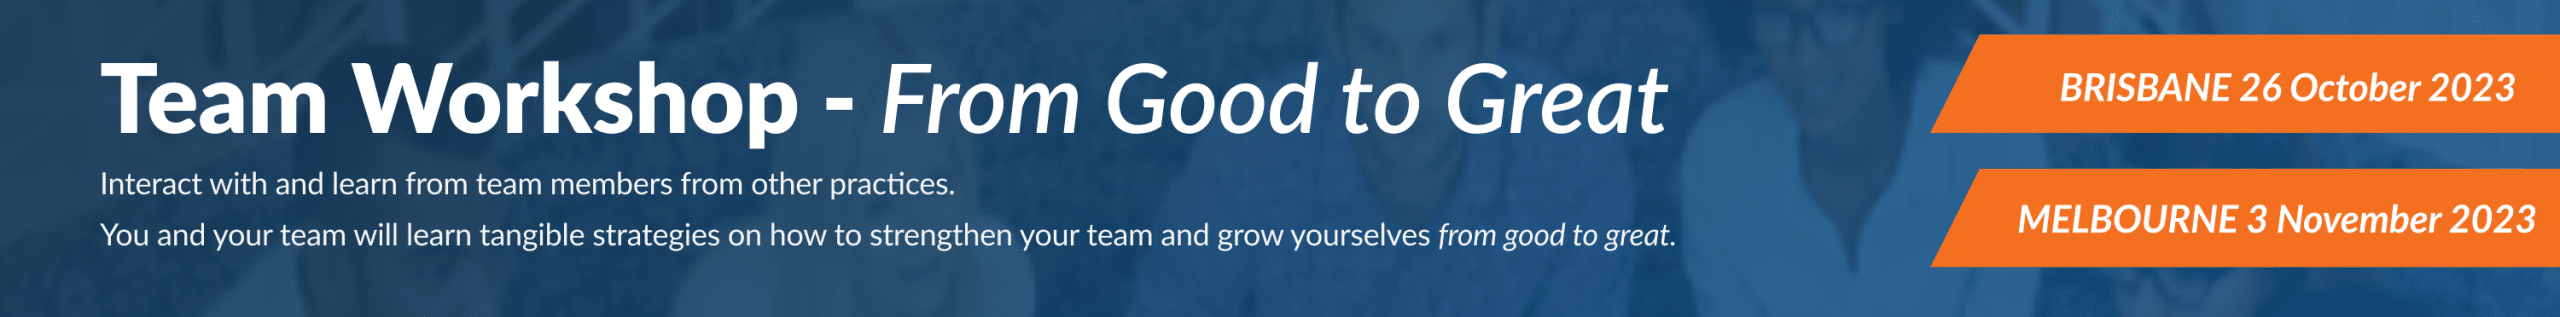 EDM TEAM WORKSHOP FROM GOOD TO GREAT - website banner